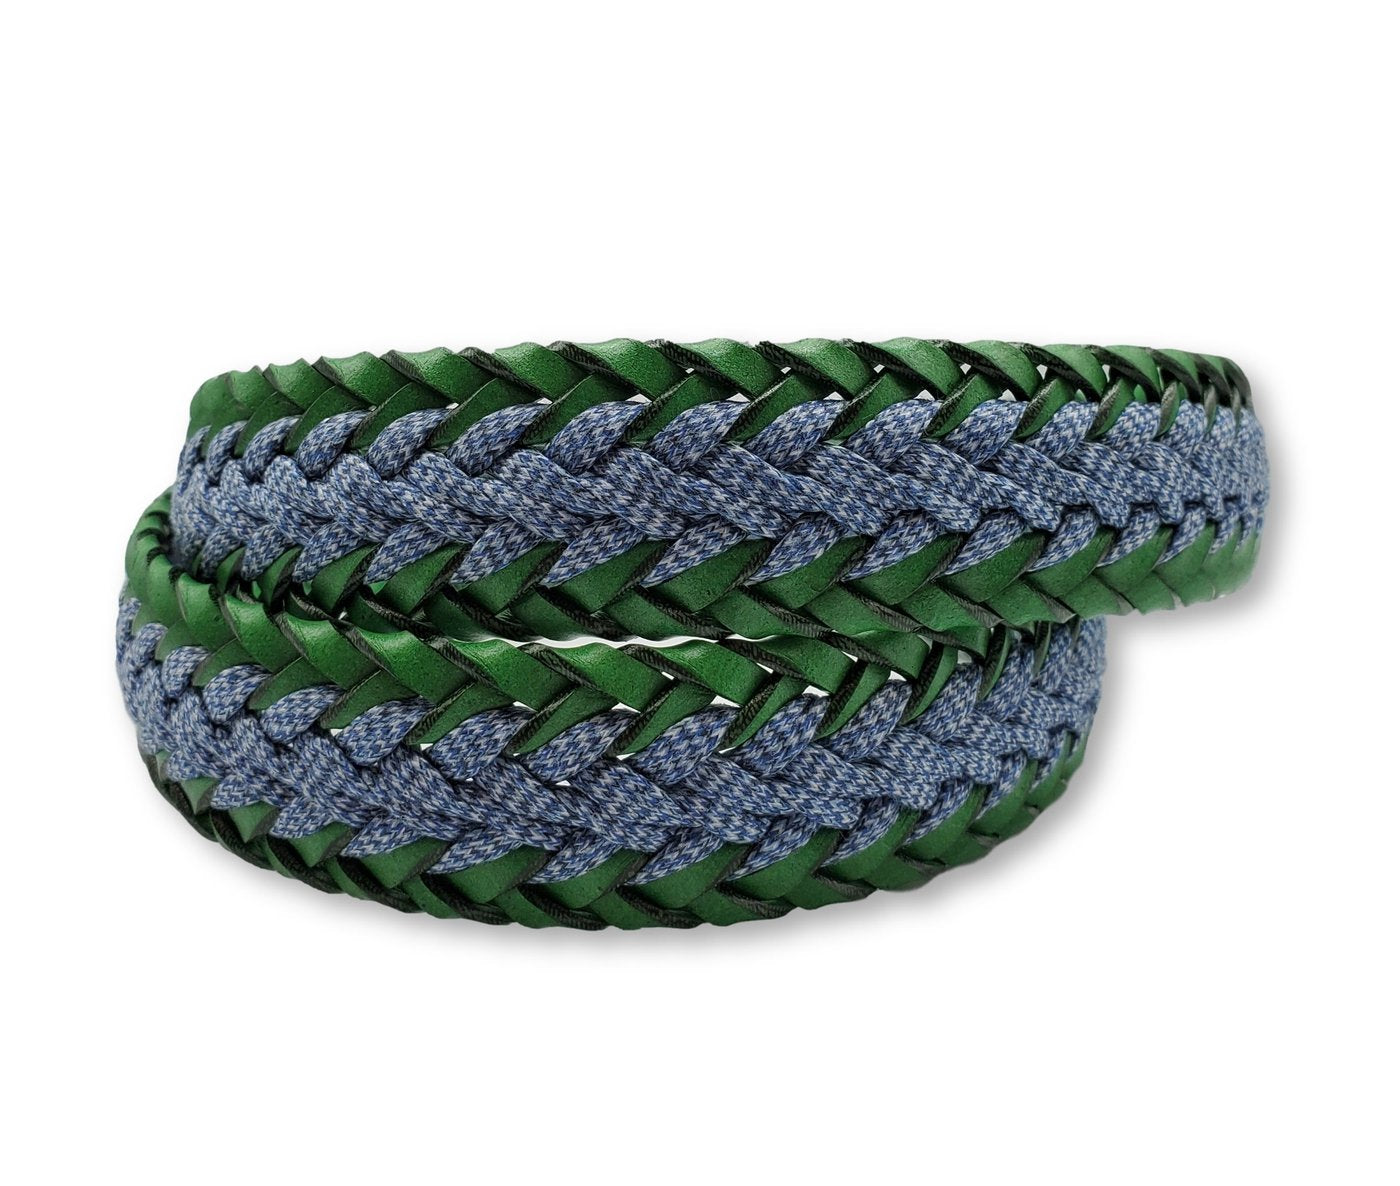 -- [Braided Blue and Green]